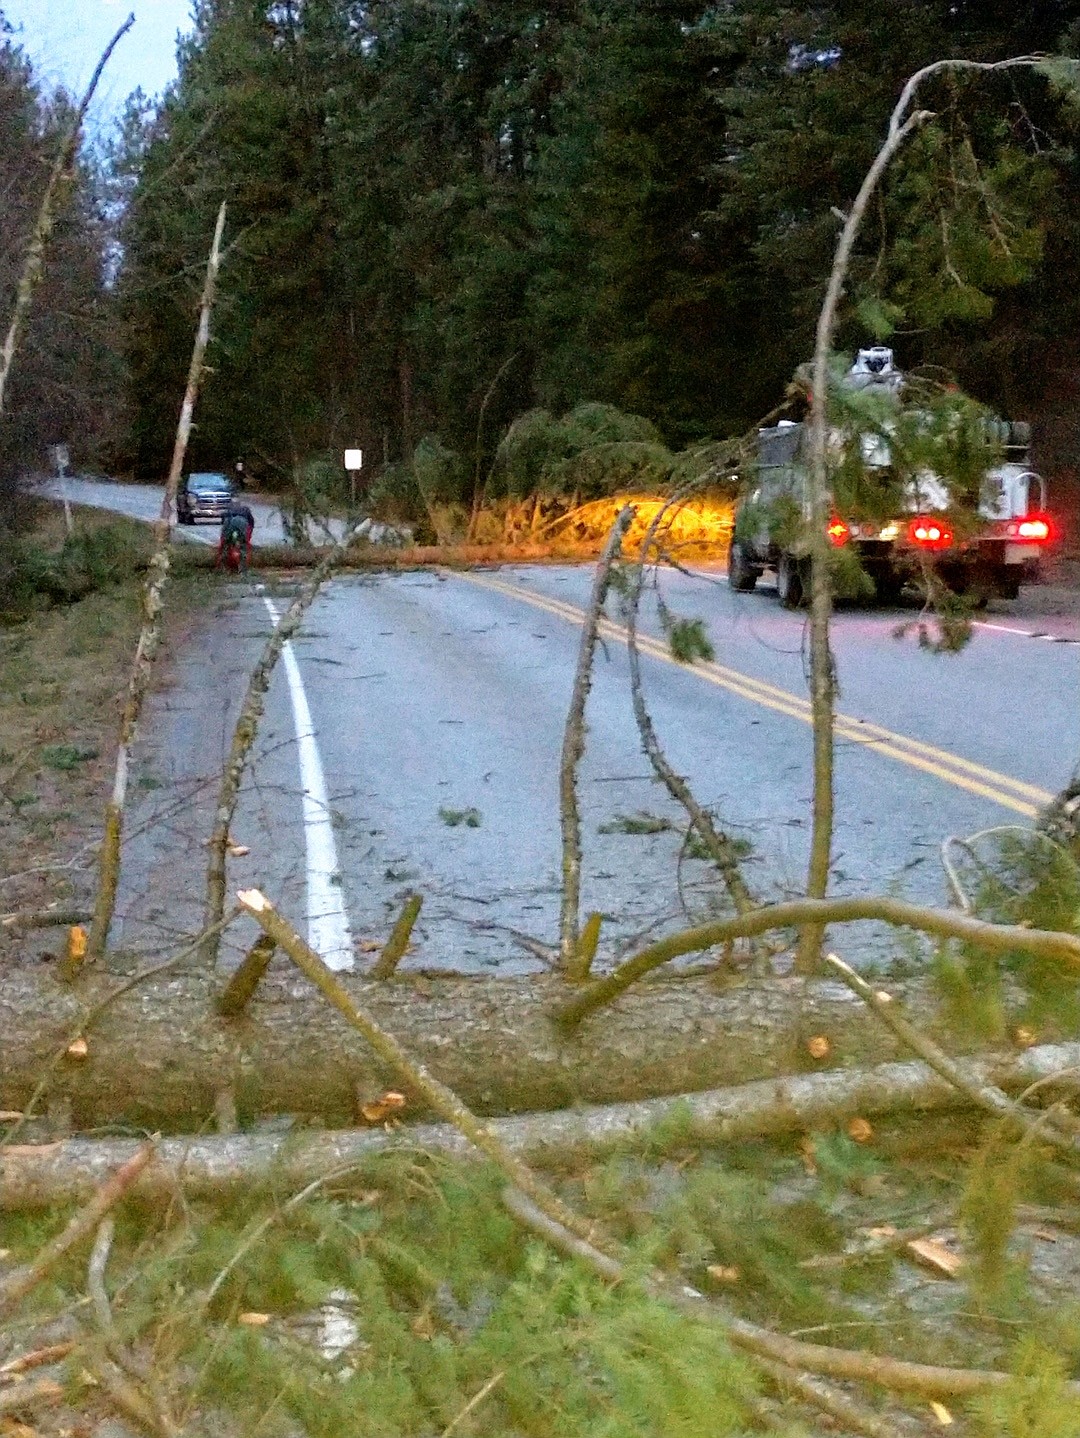 Courtesy photo
High winds are causing trees to fall into power lines and across roads according to Kootenai Electric Cooperative. Crews are working as quickly and safely as possible. Crews continue to have scattered outages across our service area. Winds are expected to get worse throughout the day, and we anticipate additional outages. We have several contract and mutual aid crews coming in to work with our crews. For the latest restoration times please visit https://www.kec.com/outage-map